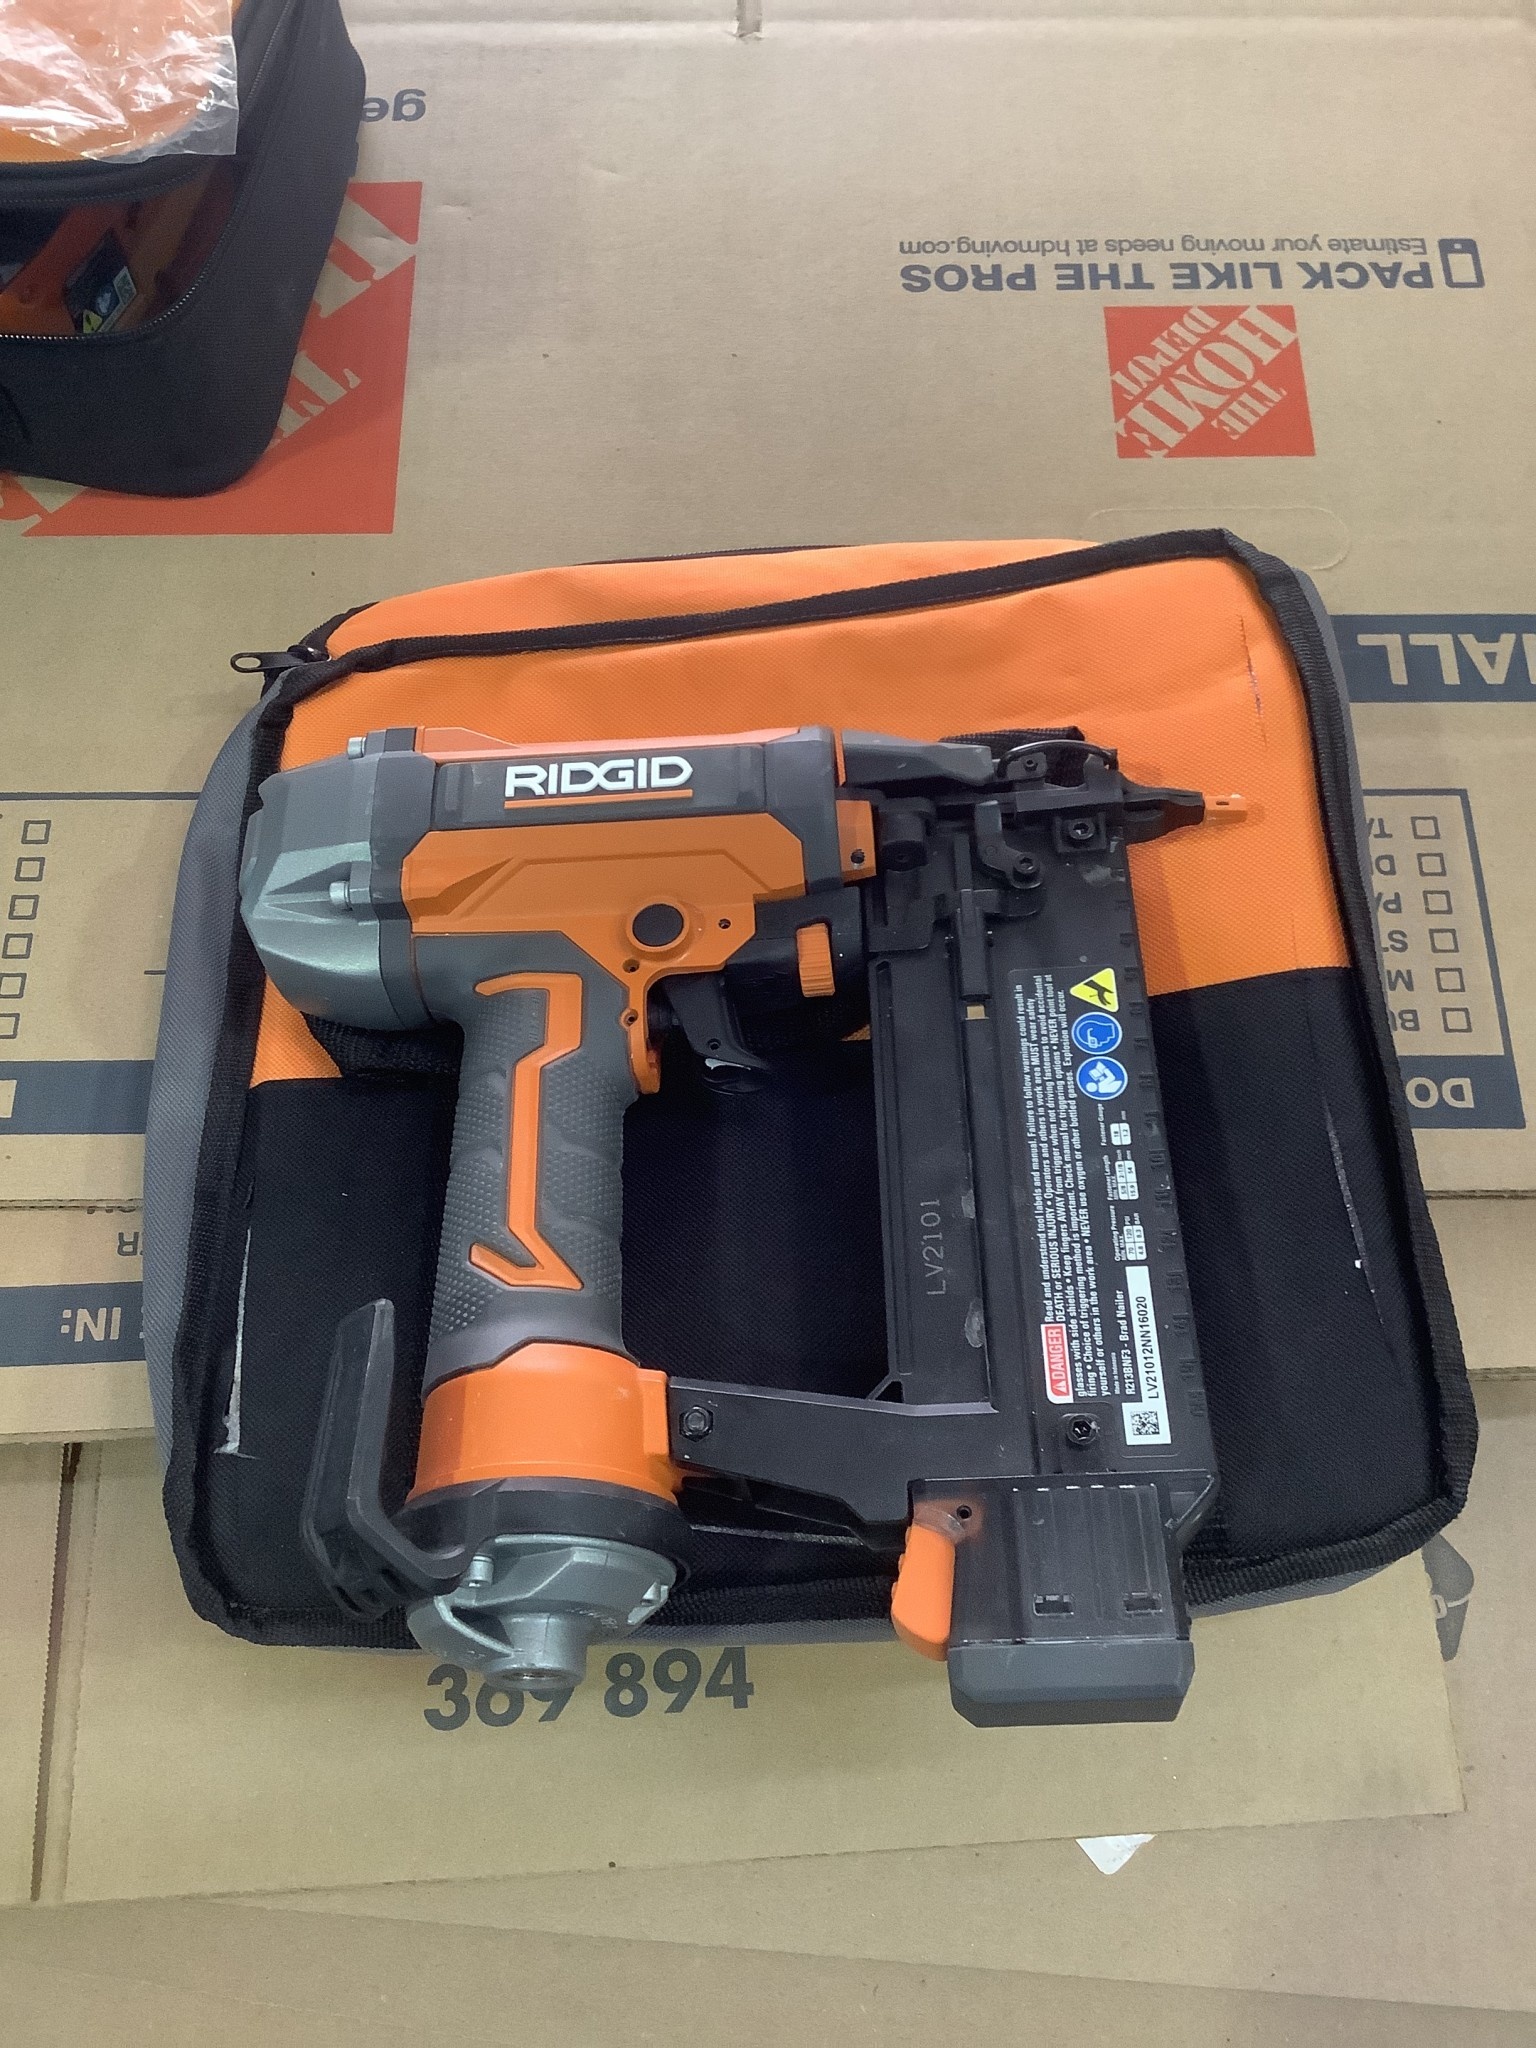 RIDGID 18-Gauge 2-1/8 in Tool Bag, Brad Nailer with CLEAN DRIVE Technology